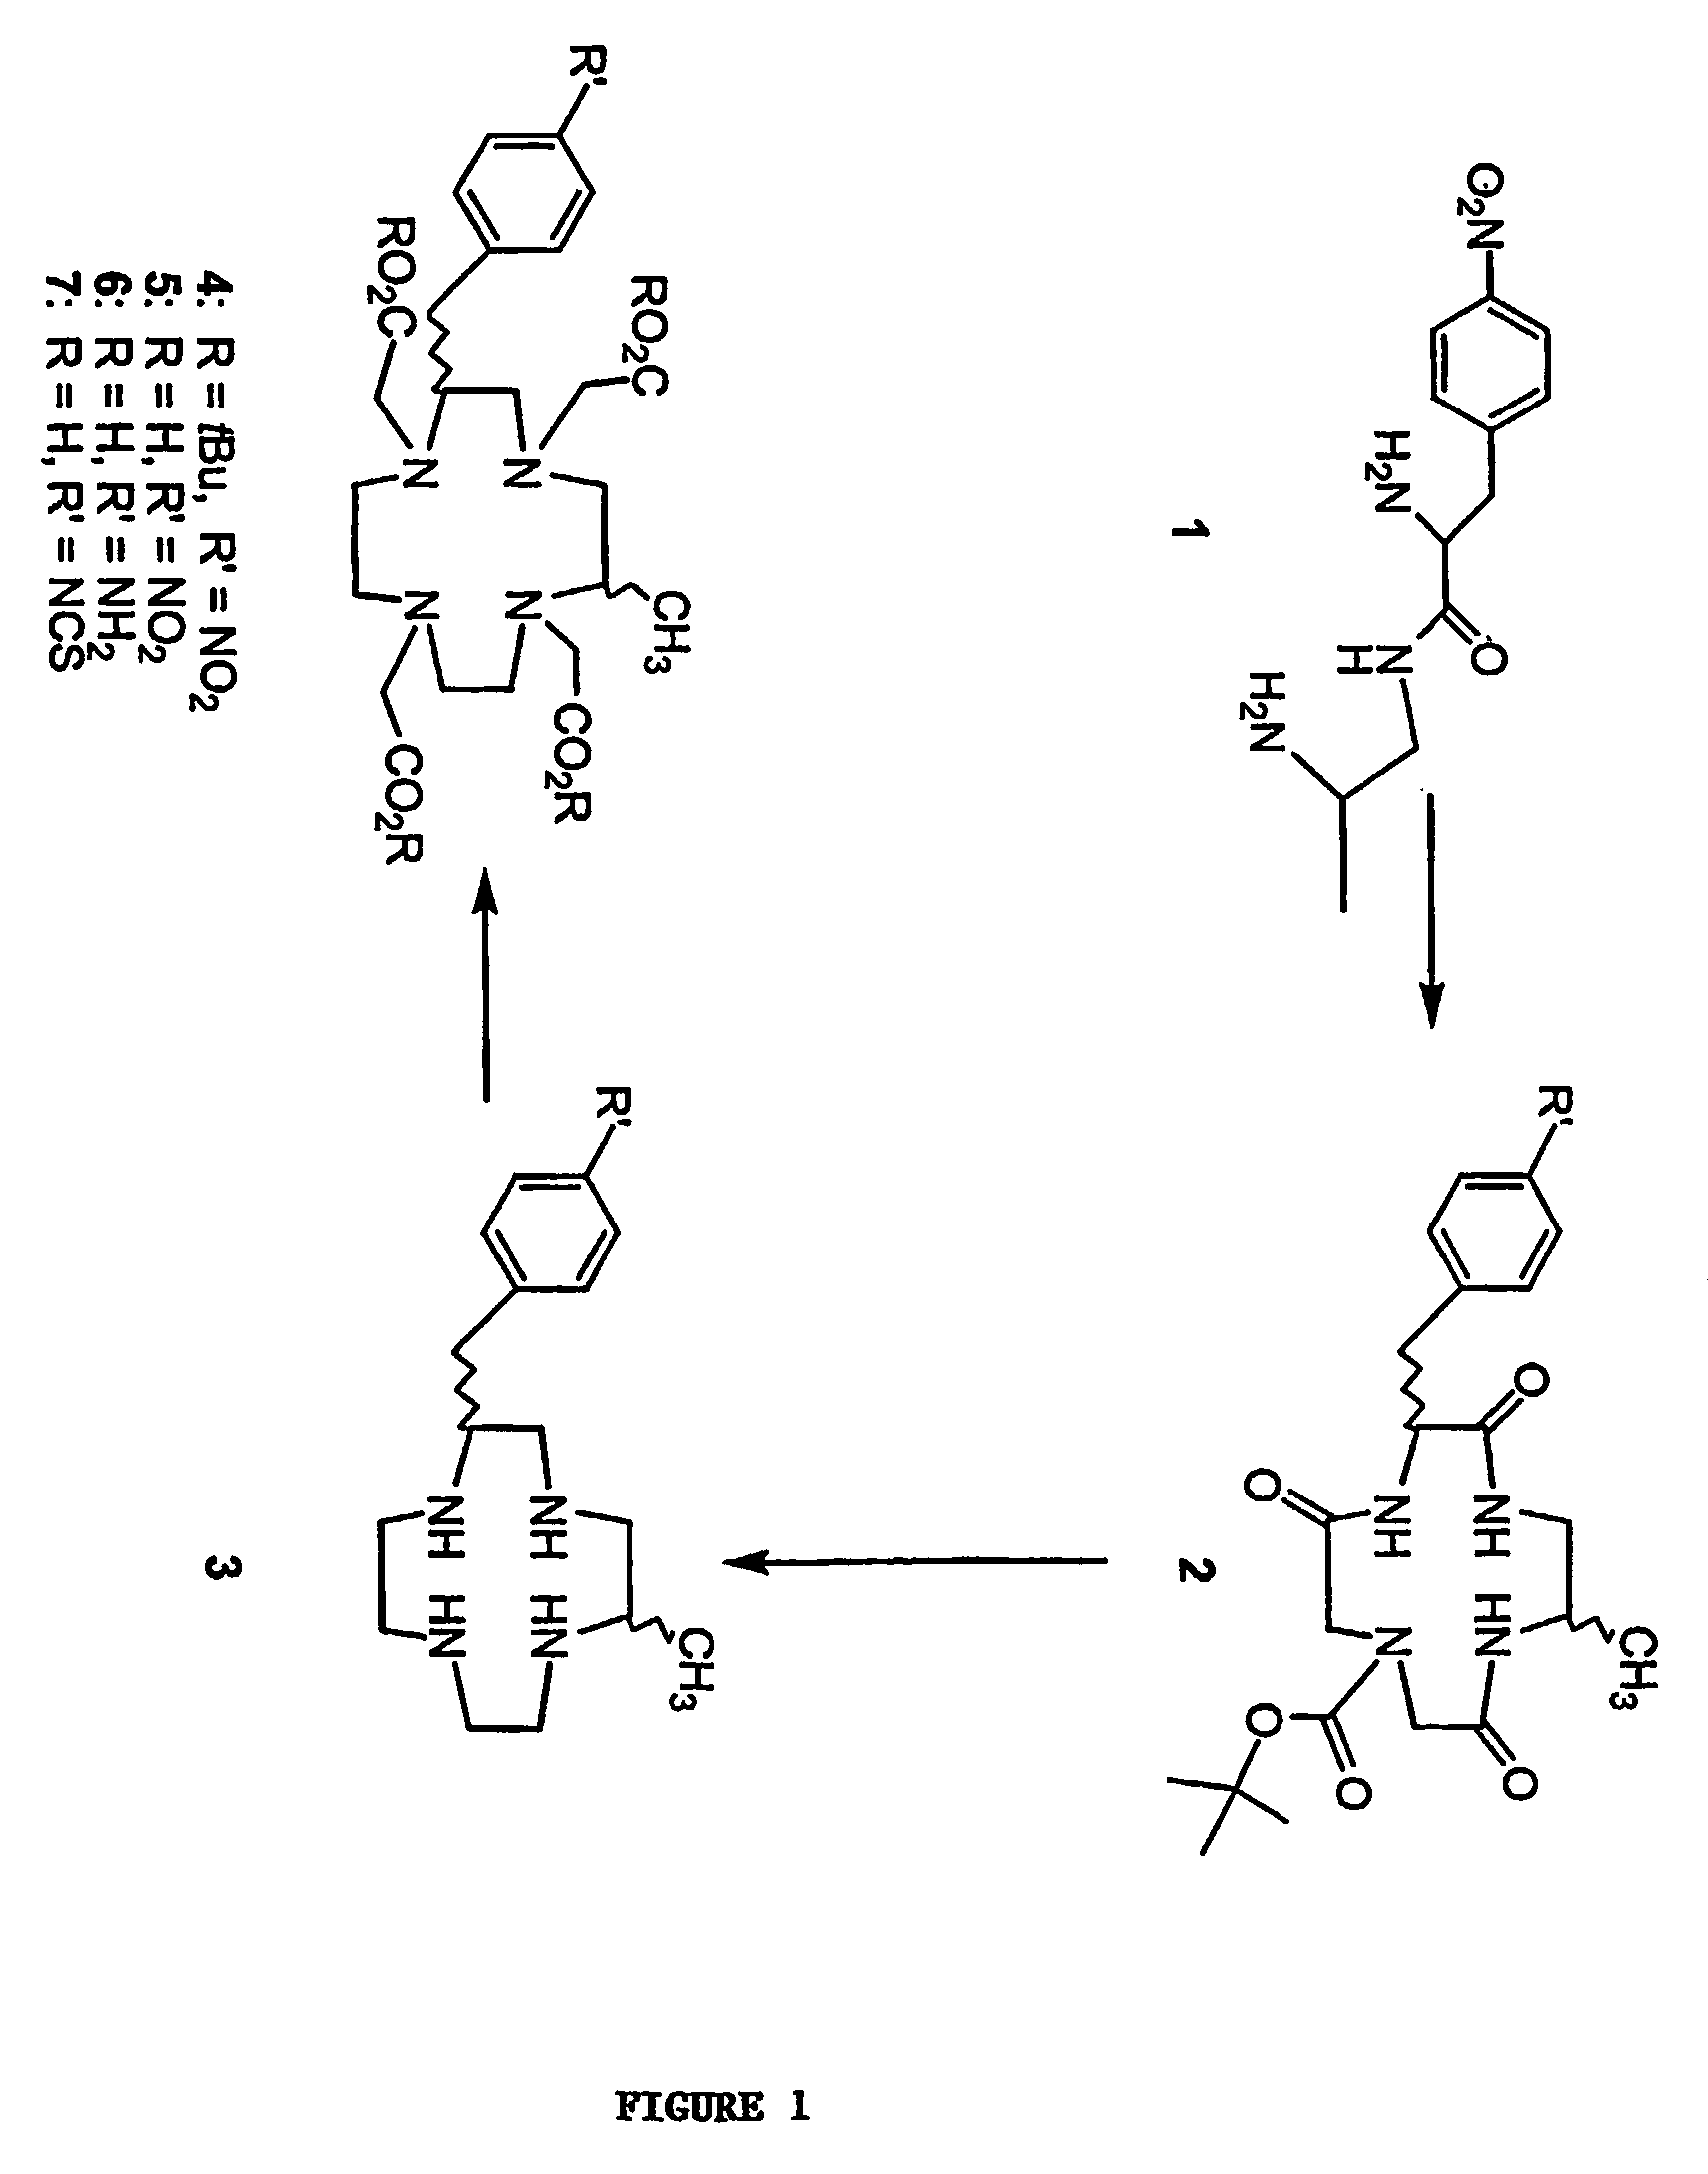 Backbone-substituted bifunctional DOTA ligands, complexes and compositions thereof, and methods of using same